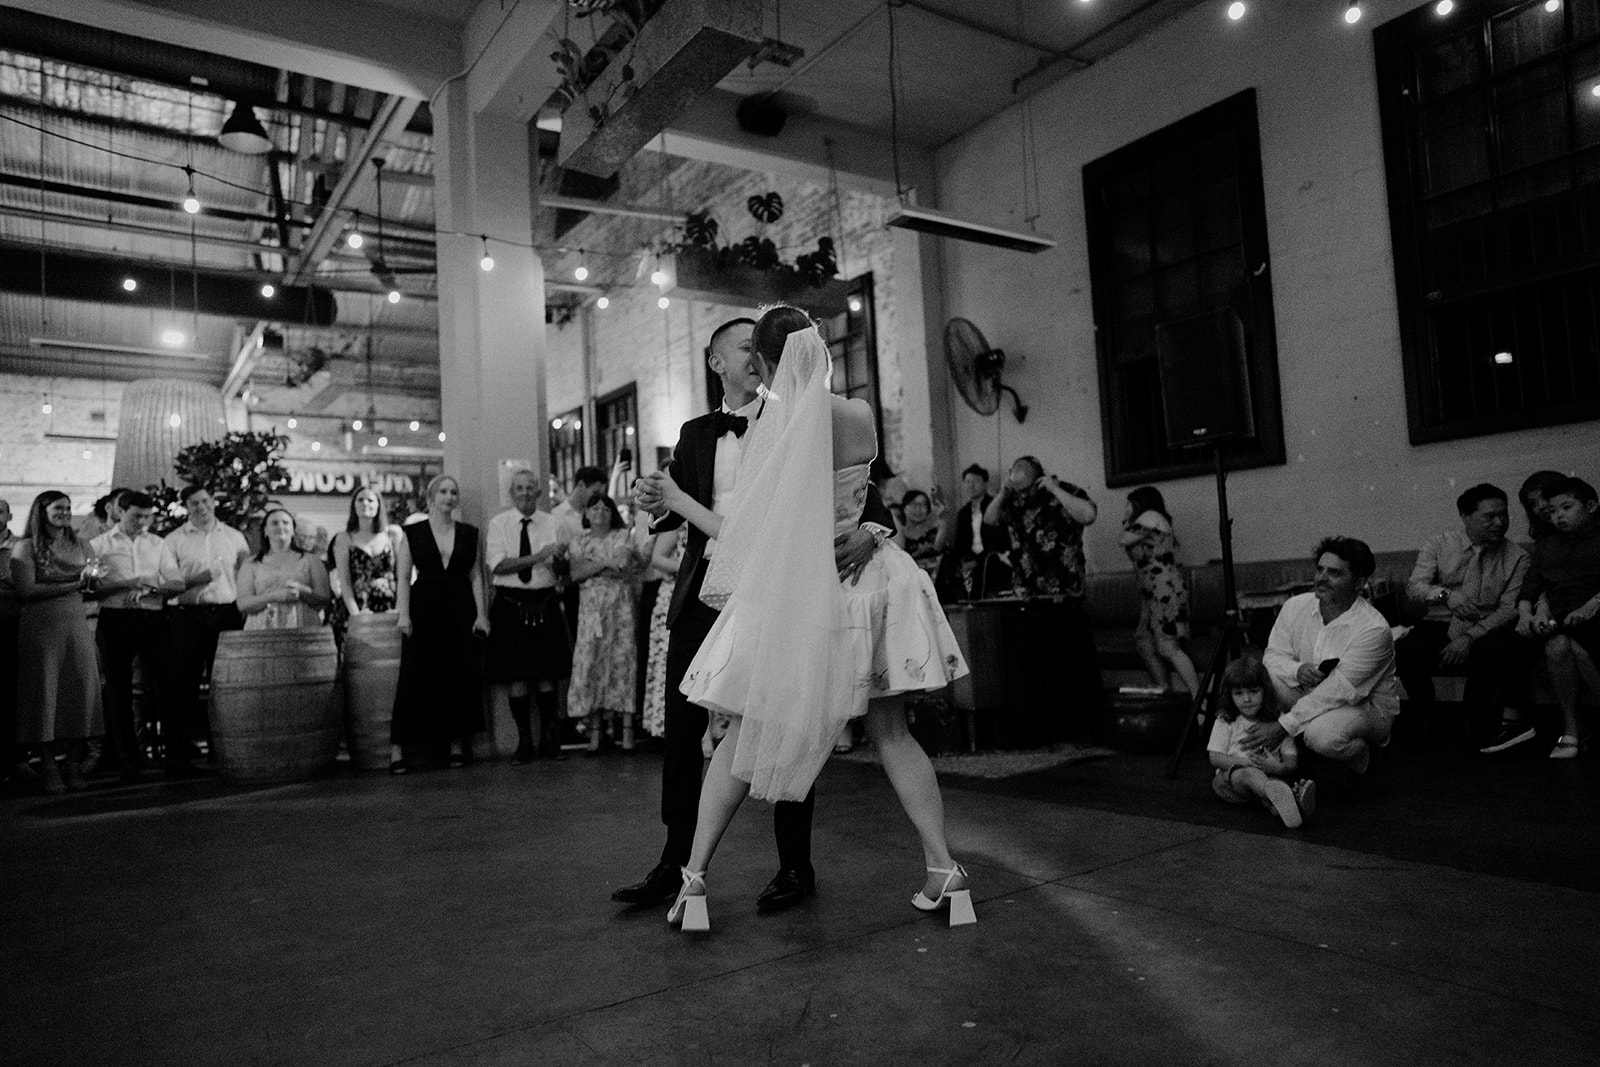 Bride and groom's first dance in Sydney at three blue ducks